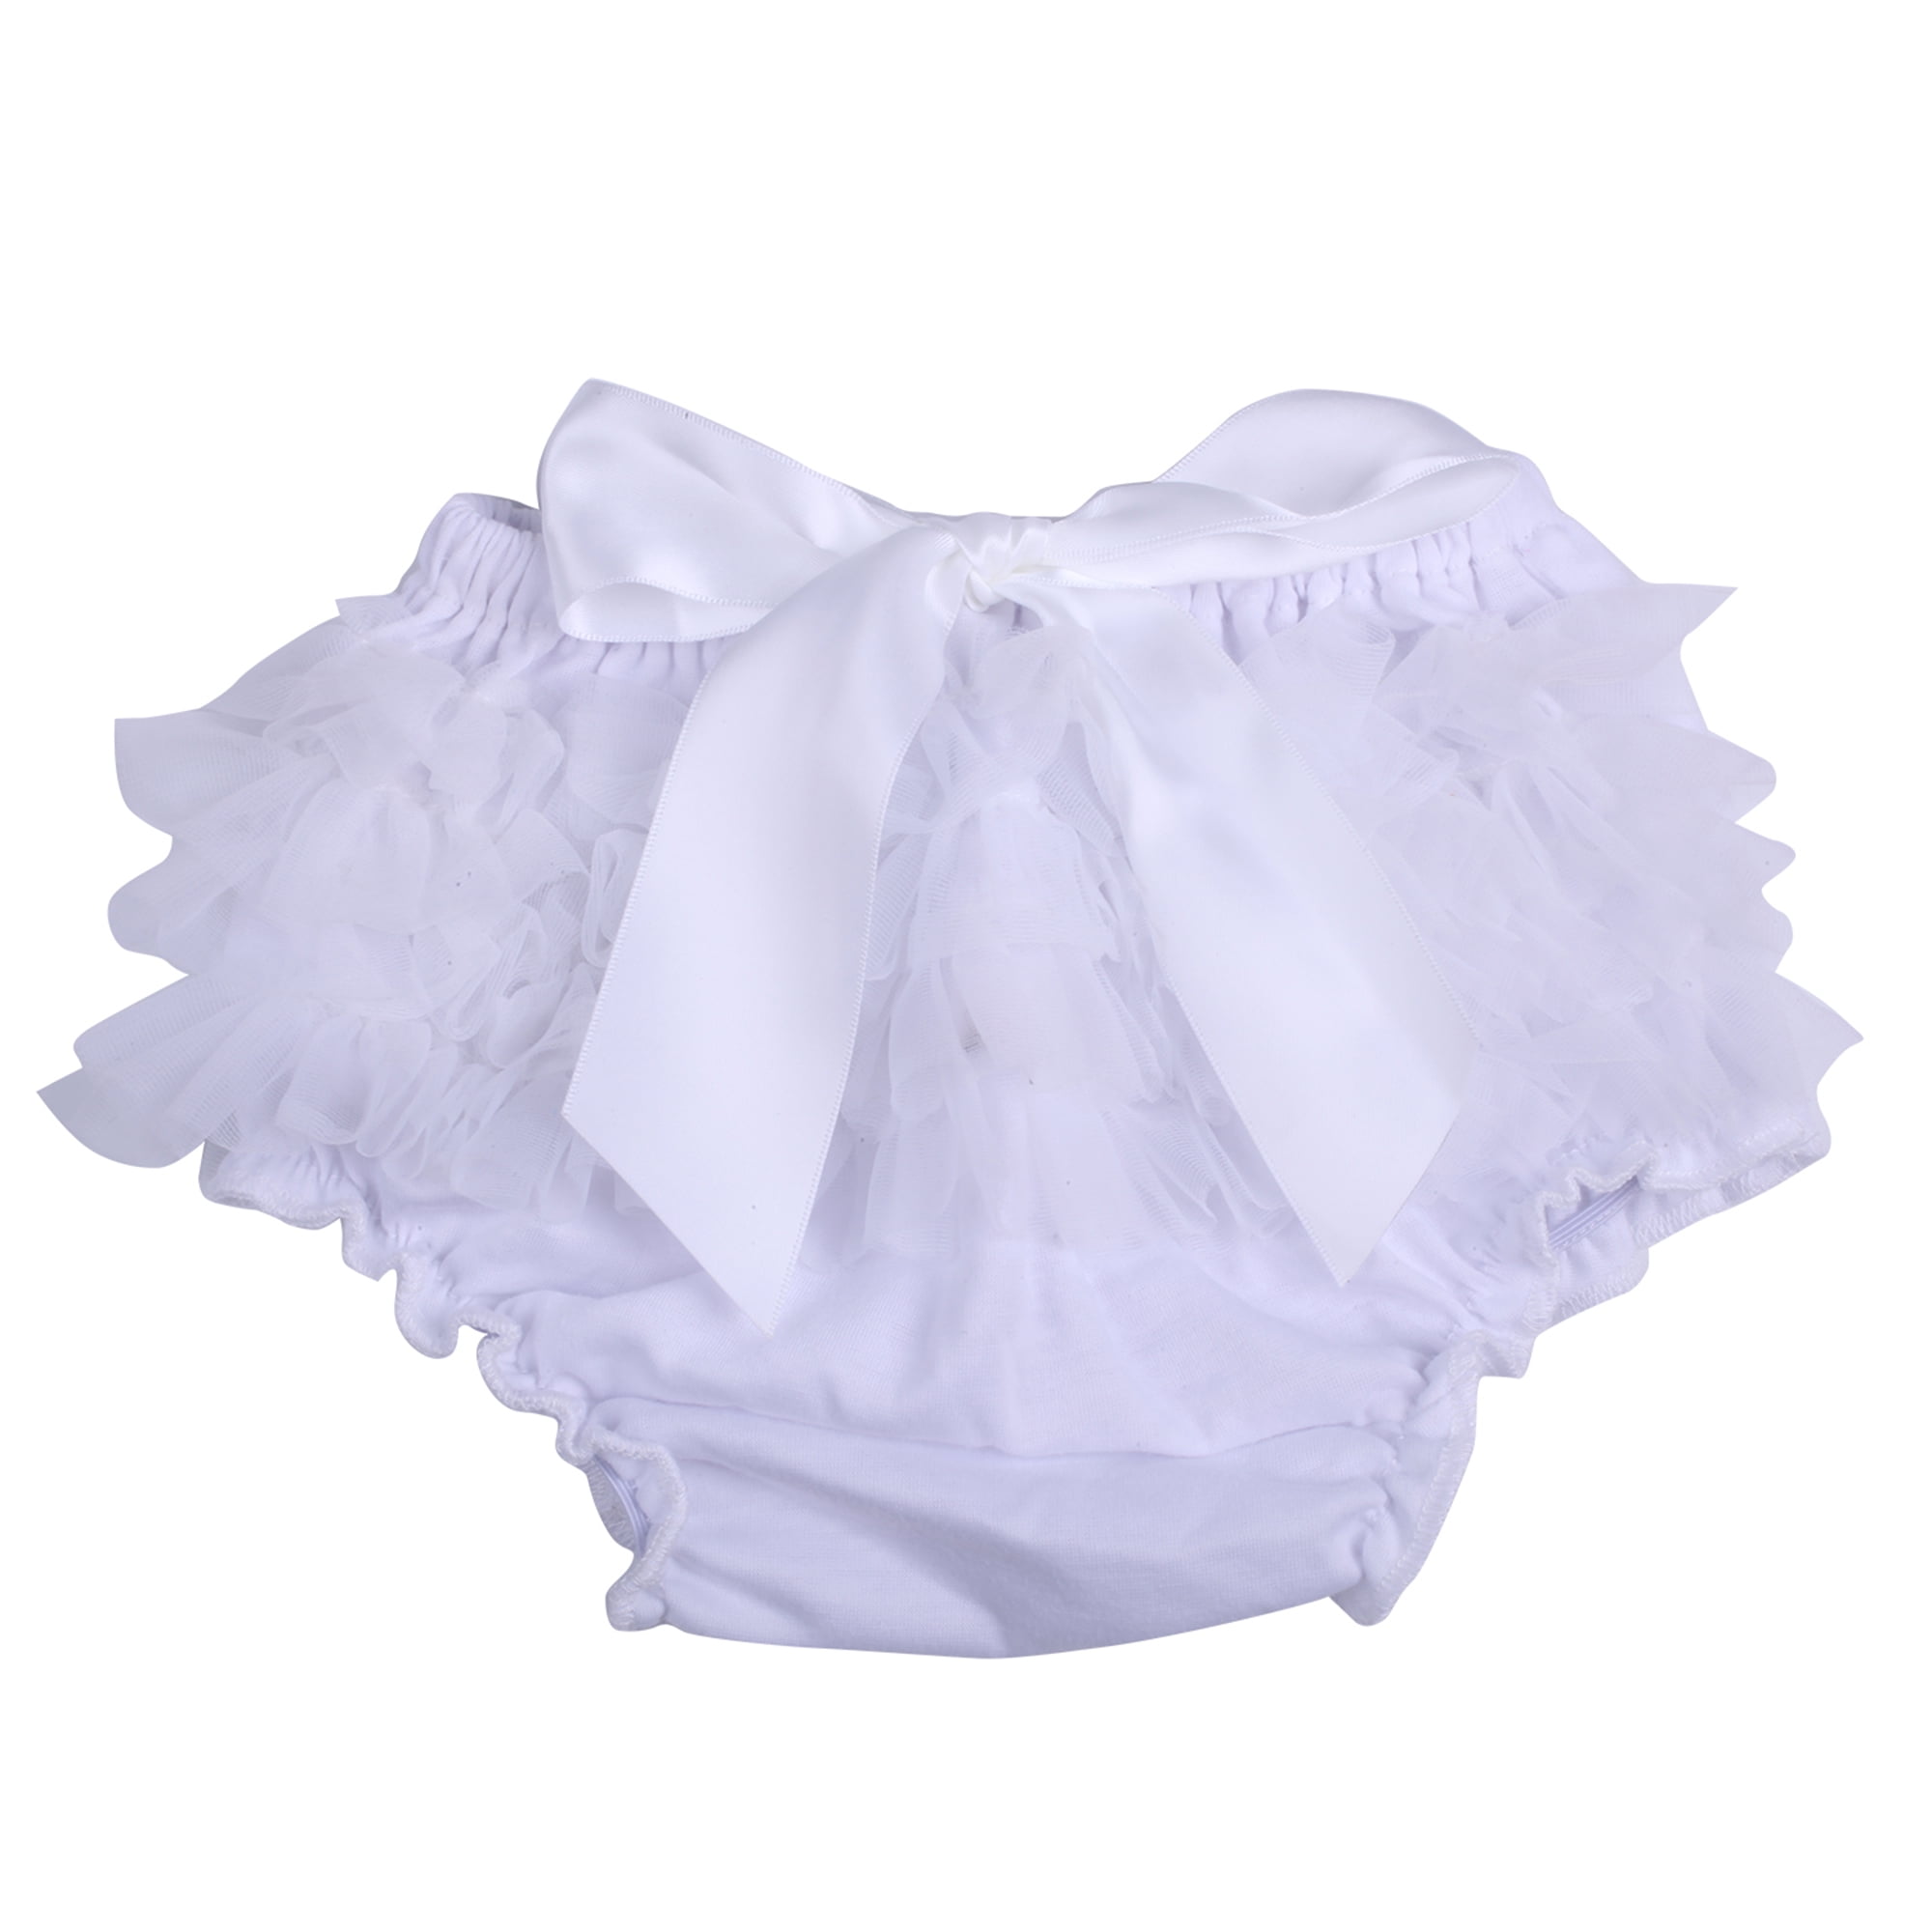 ICObuty Baby Girls Ruffle Bloomer Diaper Cover for Baby Girls Toddlers 